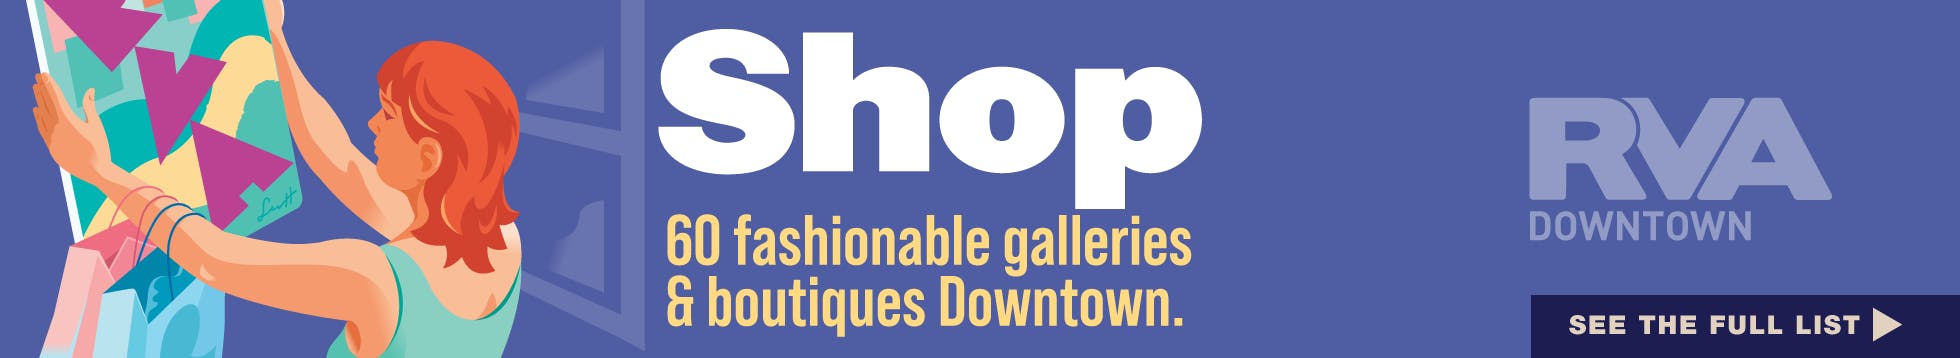 Shop 60 fashionable galleries and boutiques Downtown